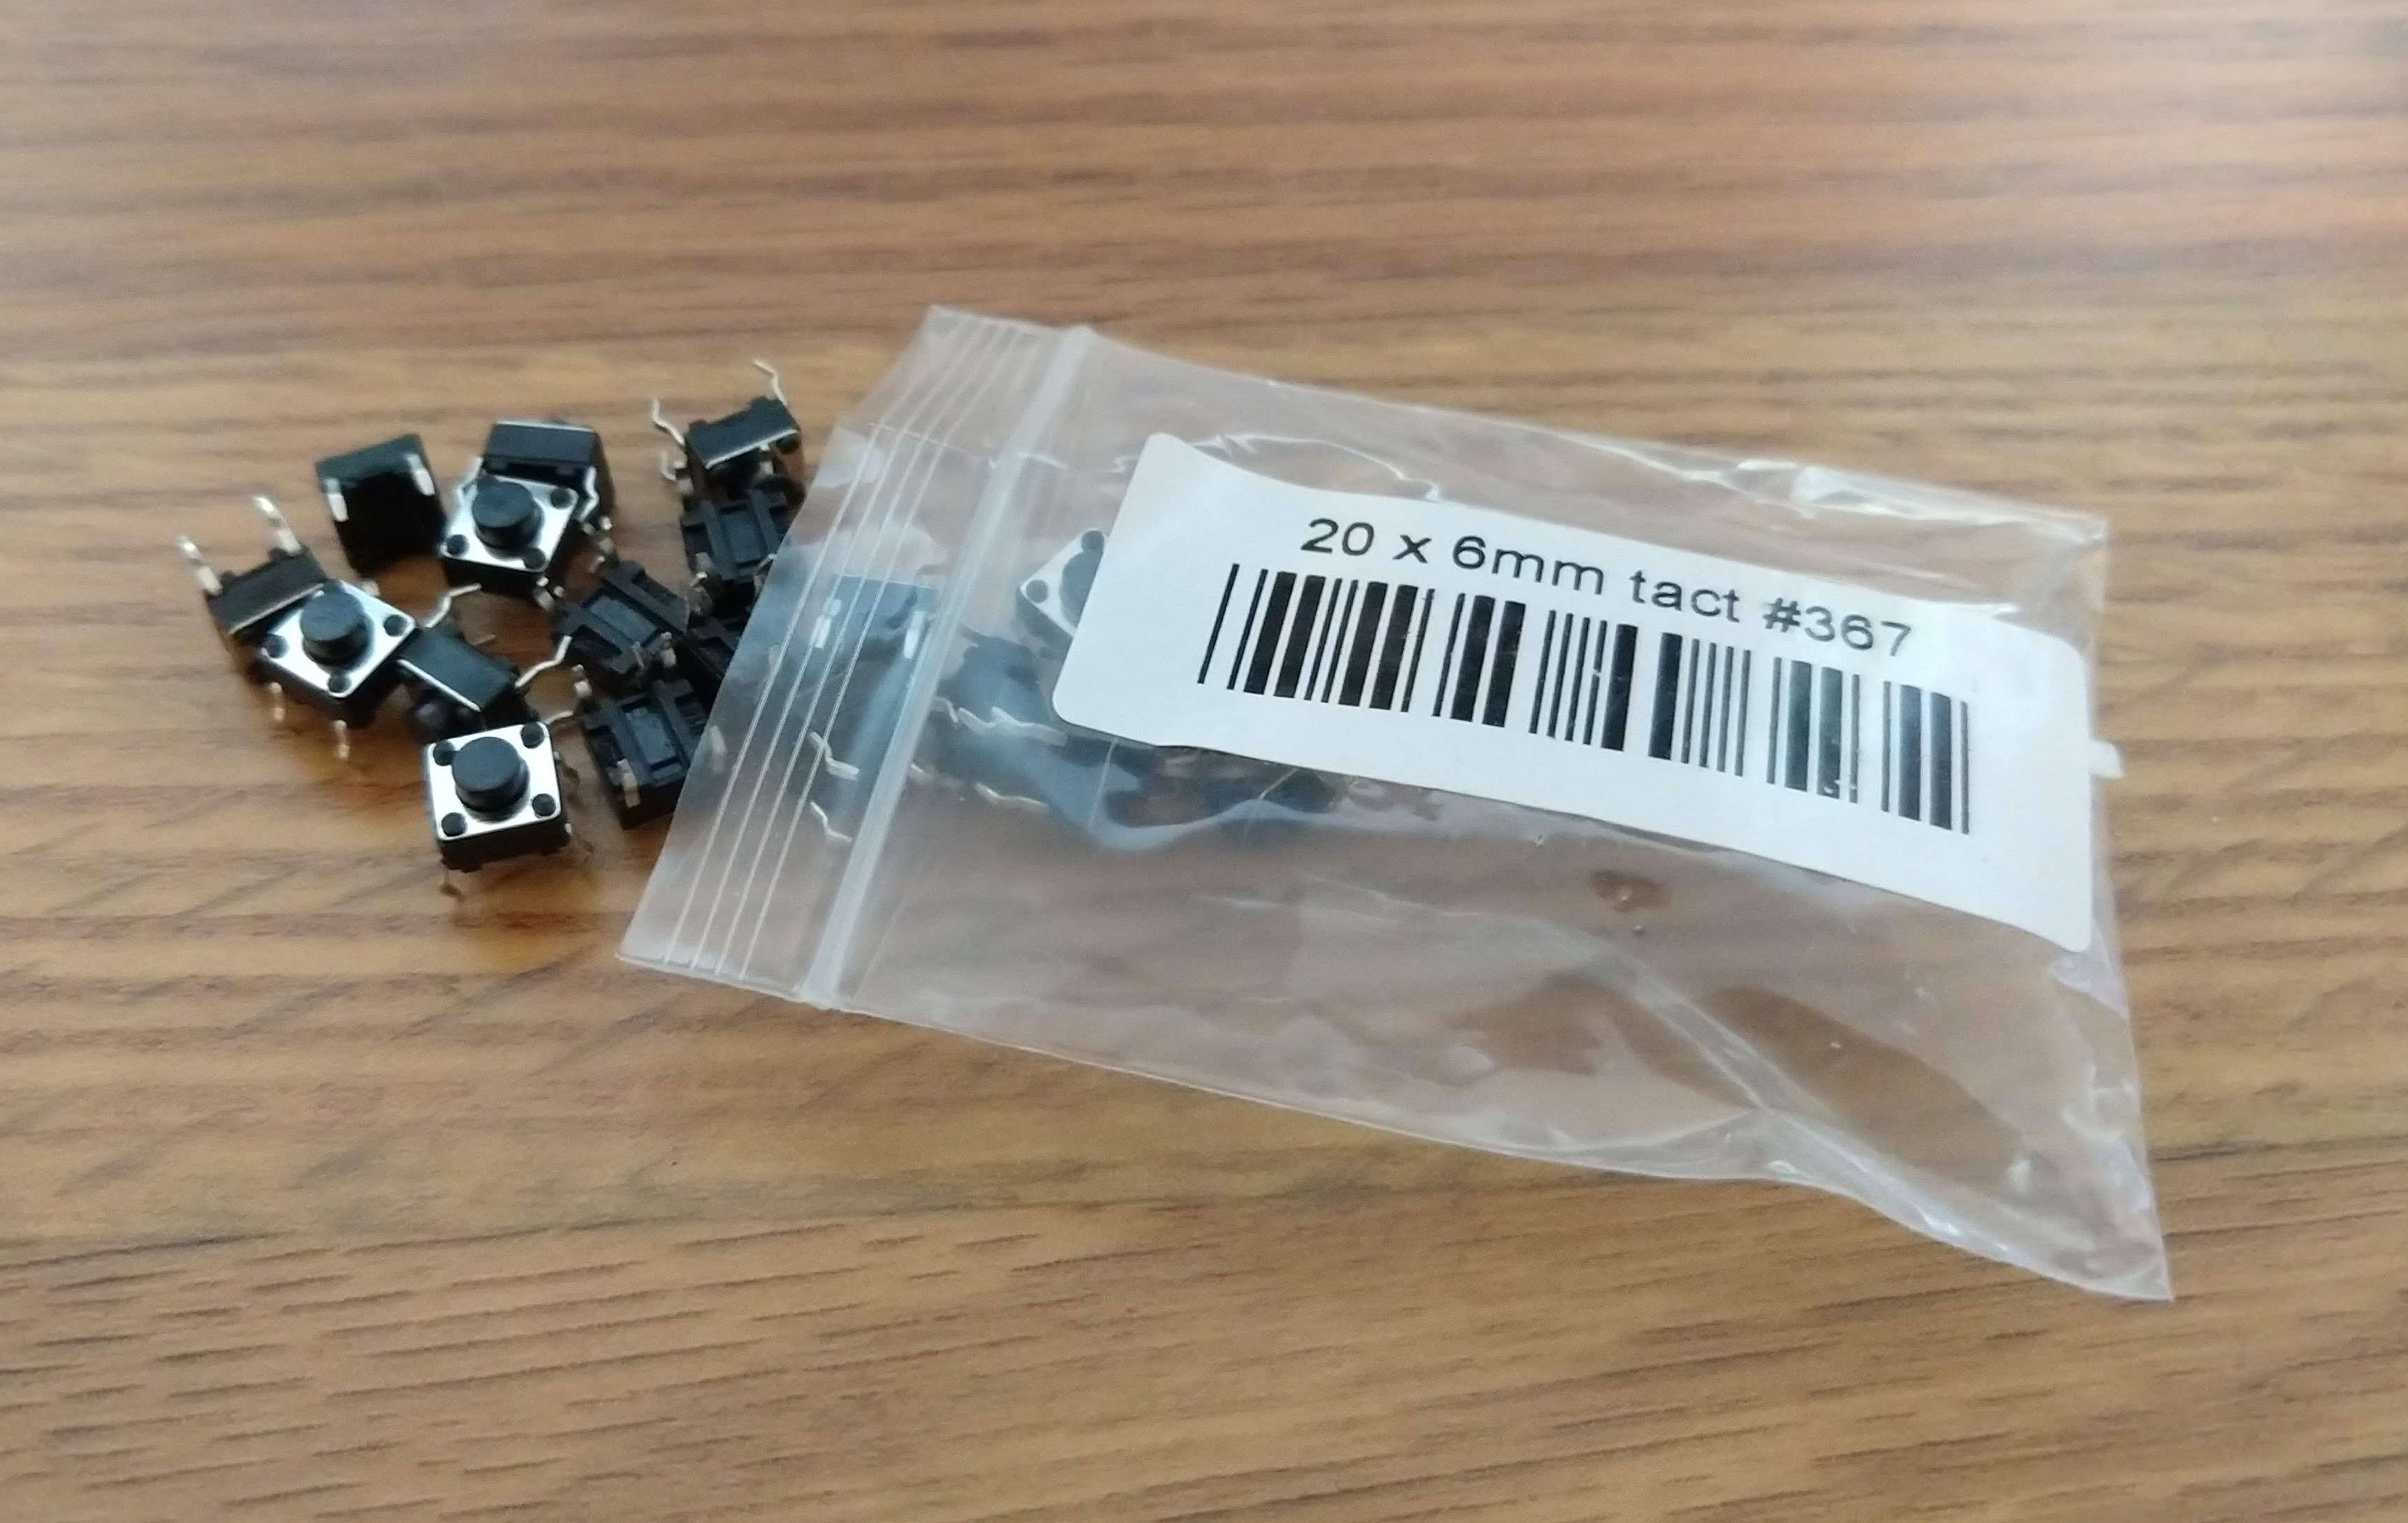 Photo of a packet of 6mm switches